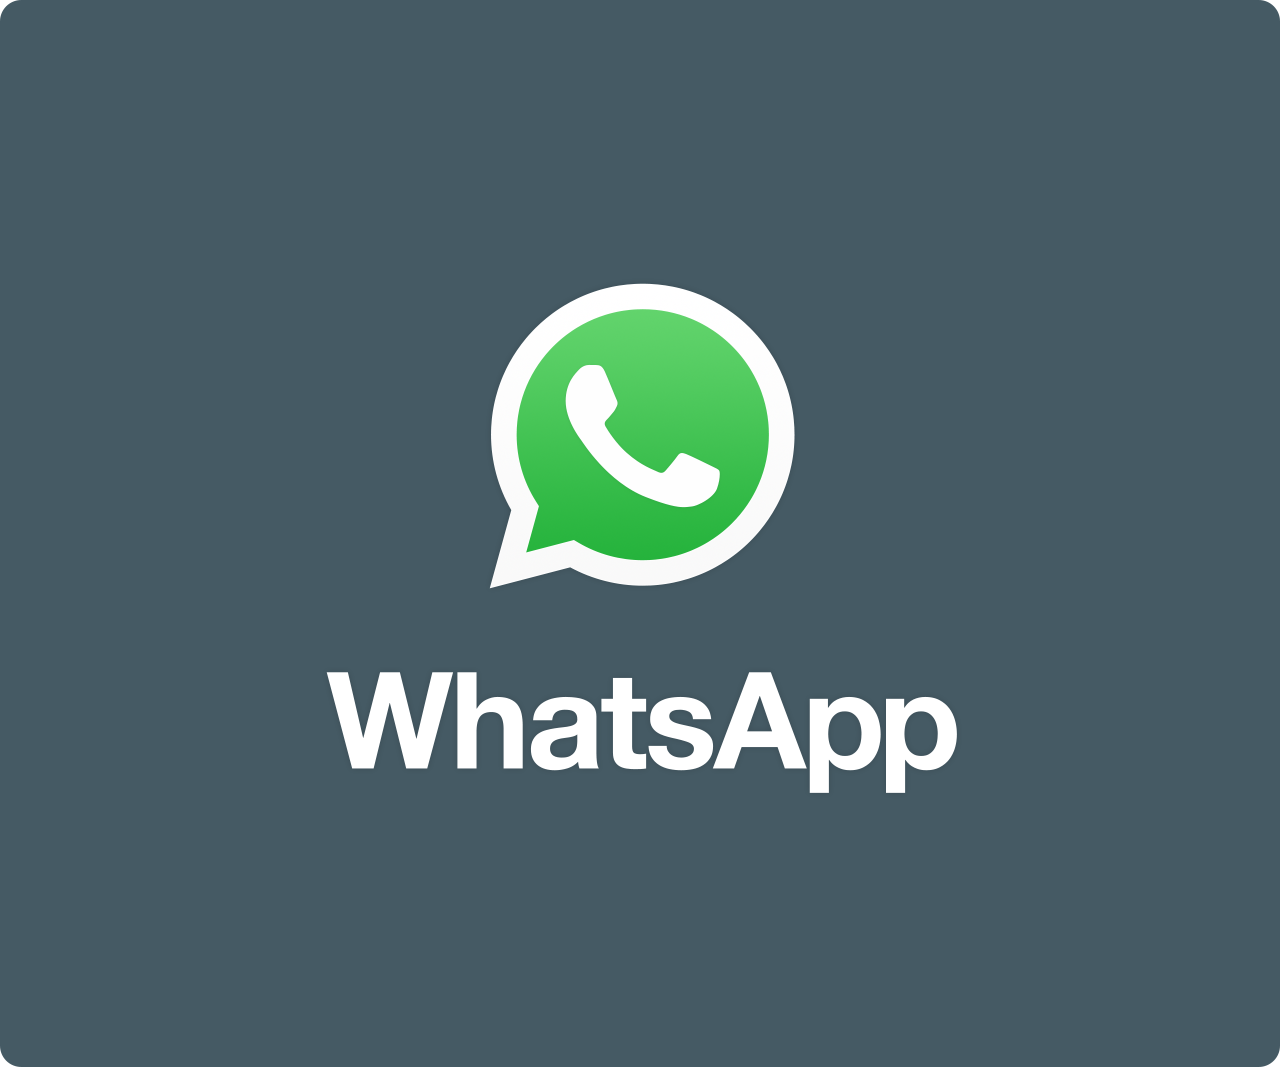 want to download whatsapp but does not finish installment